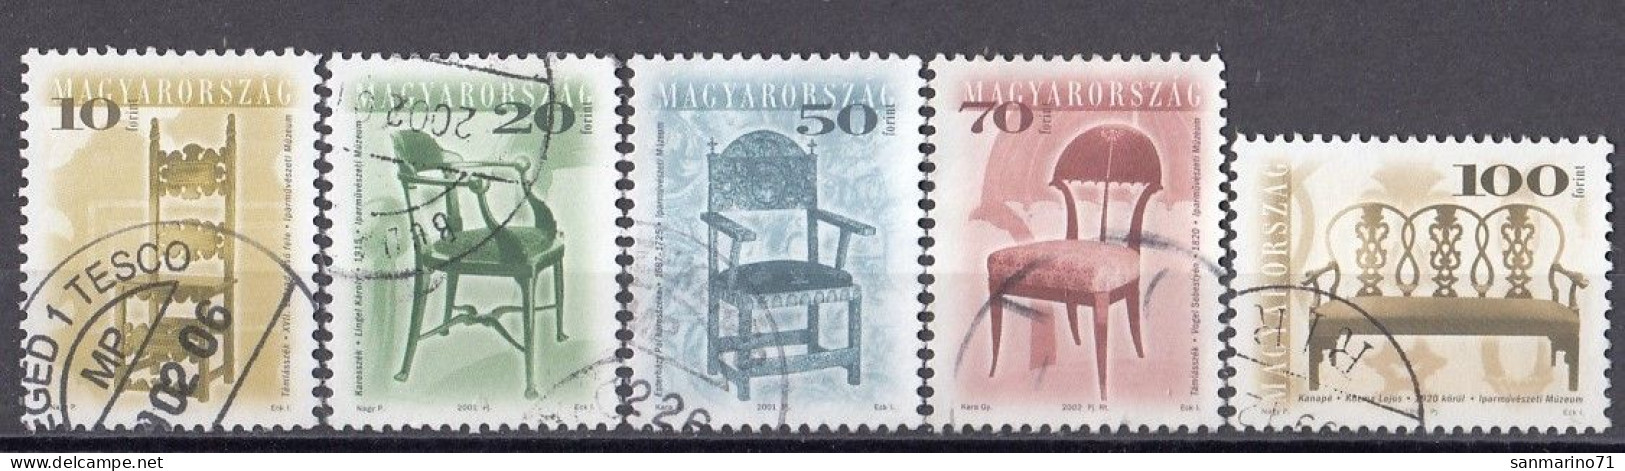 HUNGARY 4561-4565,used - Used Stamps